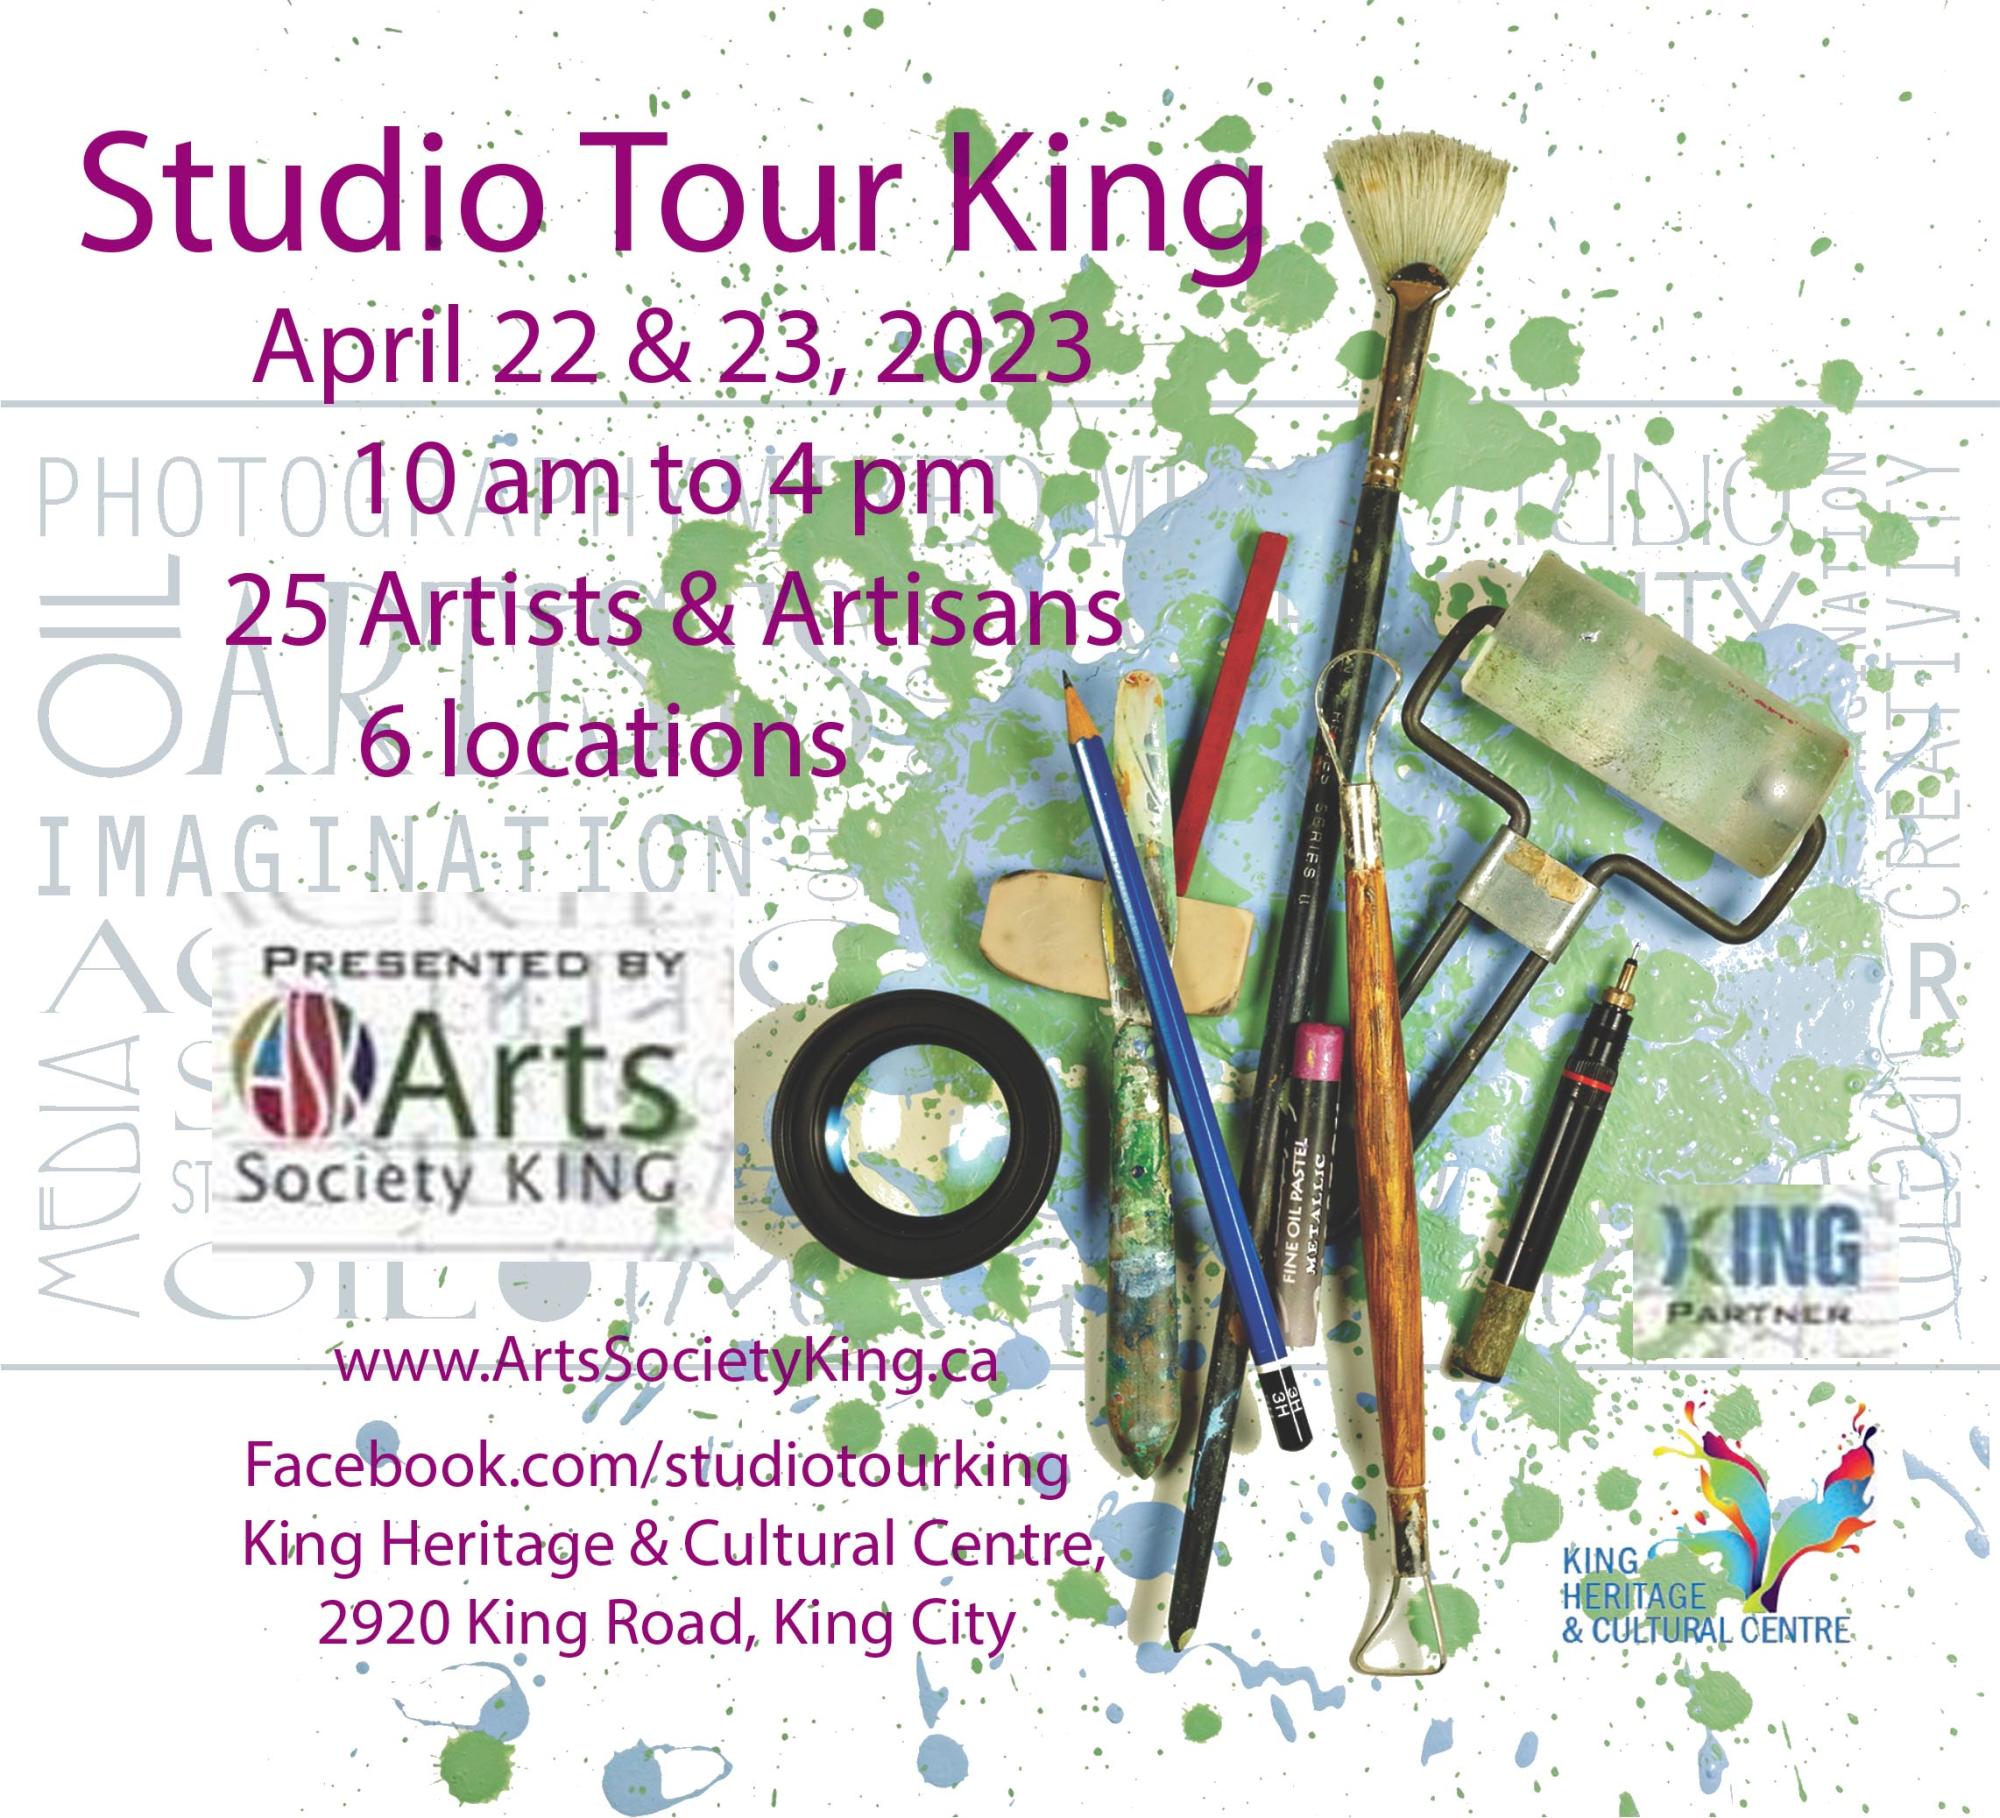 arts society king - studio tour king image advertising the event on April 22 and 23